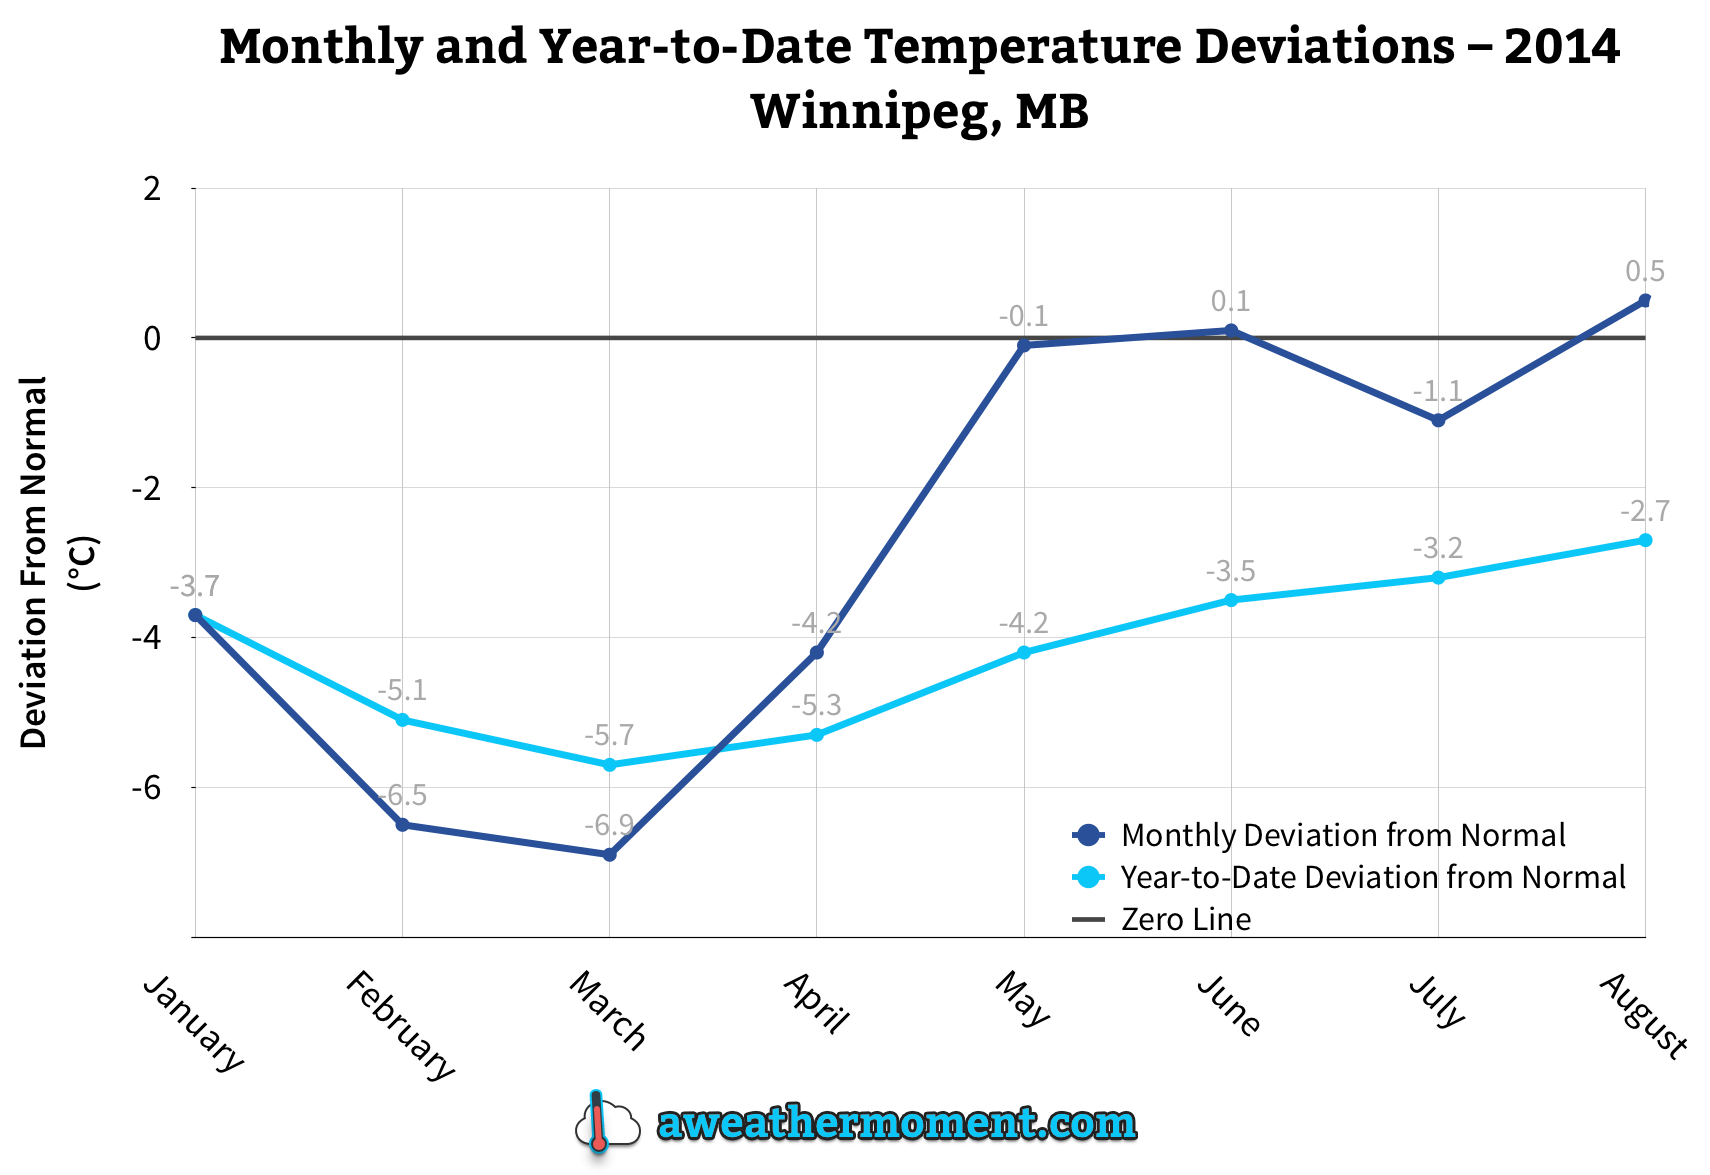 The monthly and running year-to-date temperature deviation from normal (1981-2010).